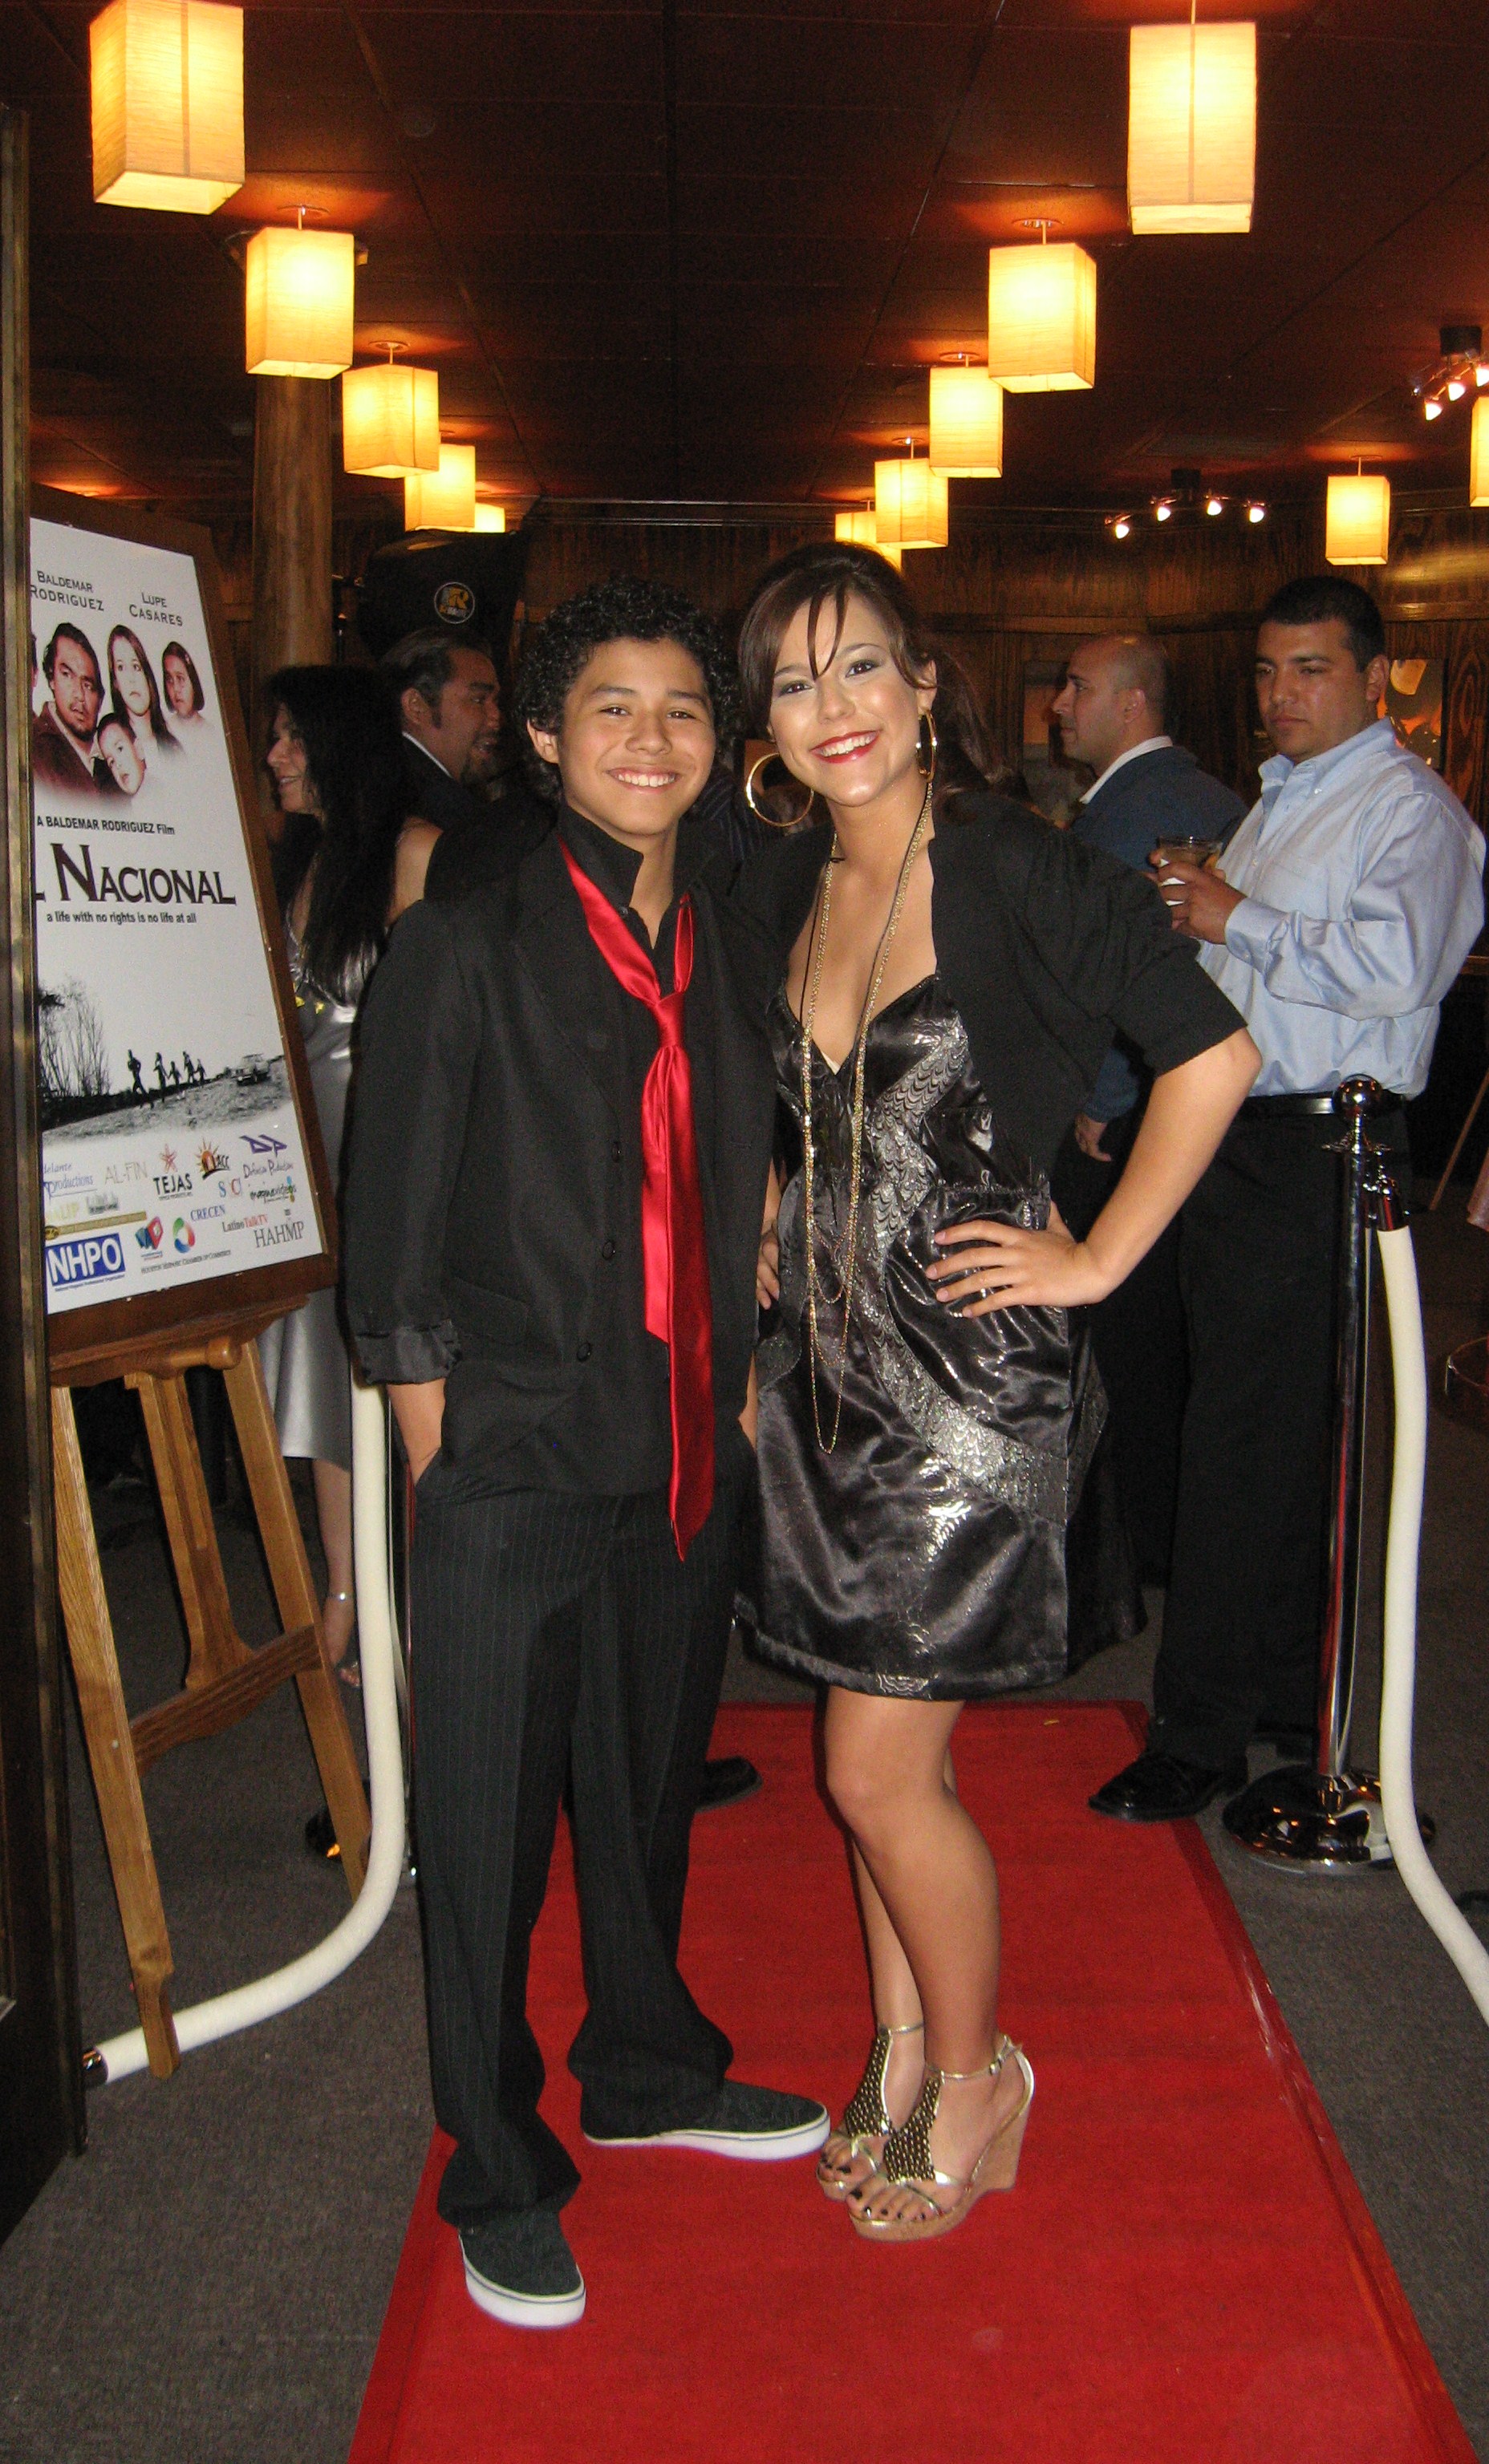 Jeremy and Shaina Sandoval at a Red Carpet Event